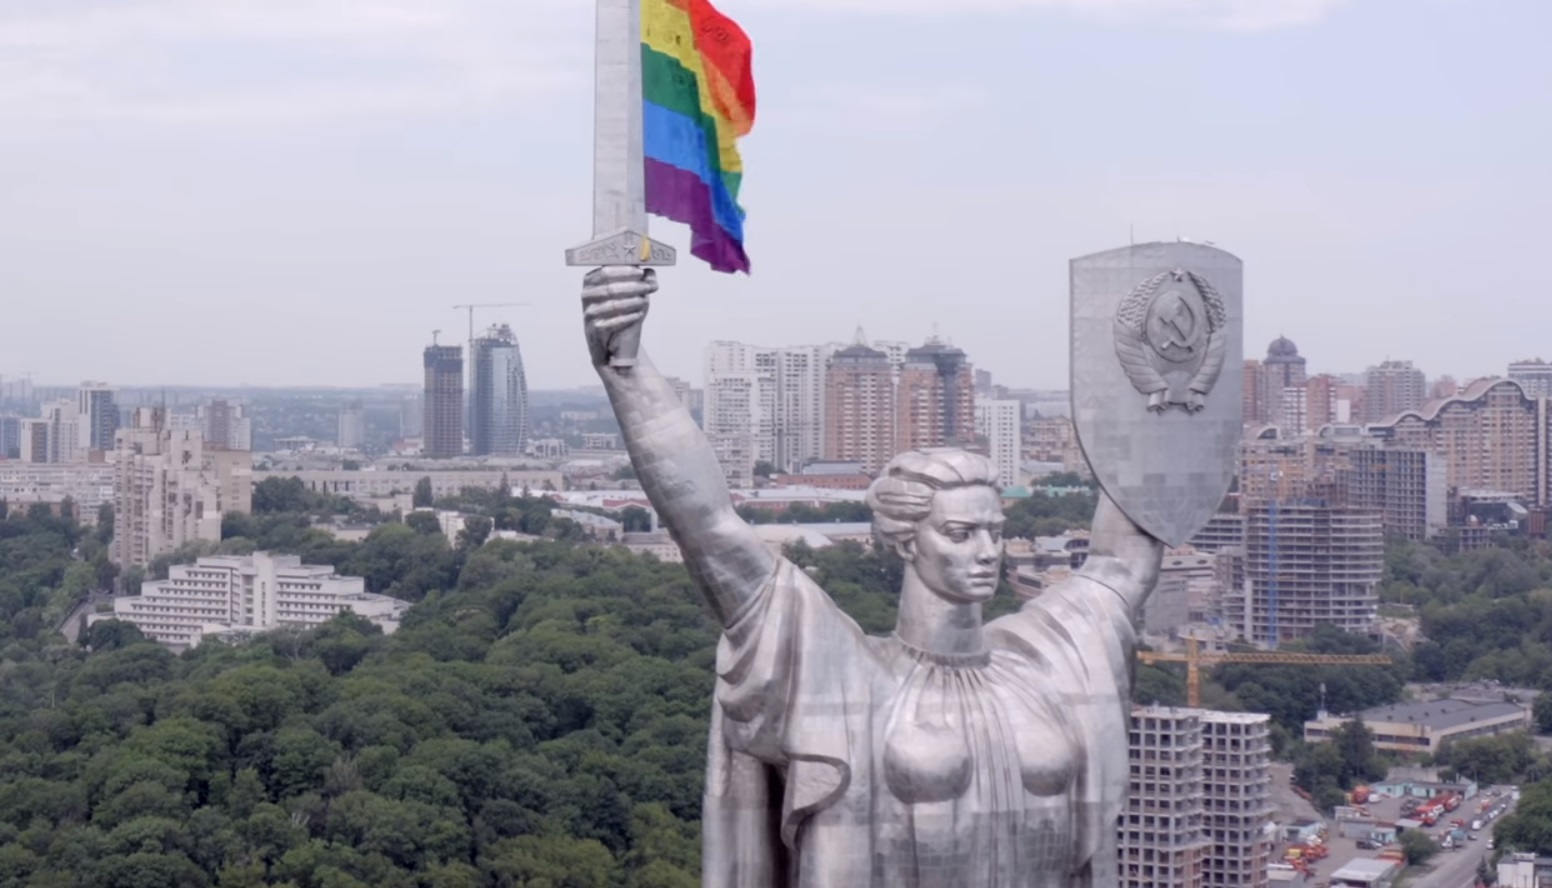 LGBT+ activists from Kyiv Pride devised the stunt after cancelling their 2020 parade